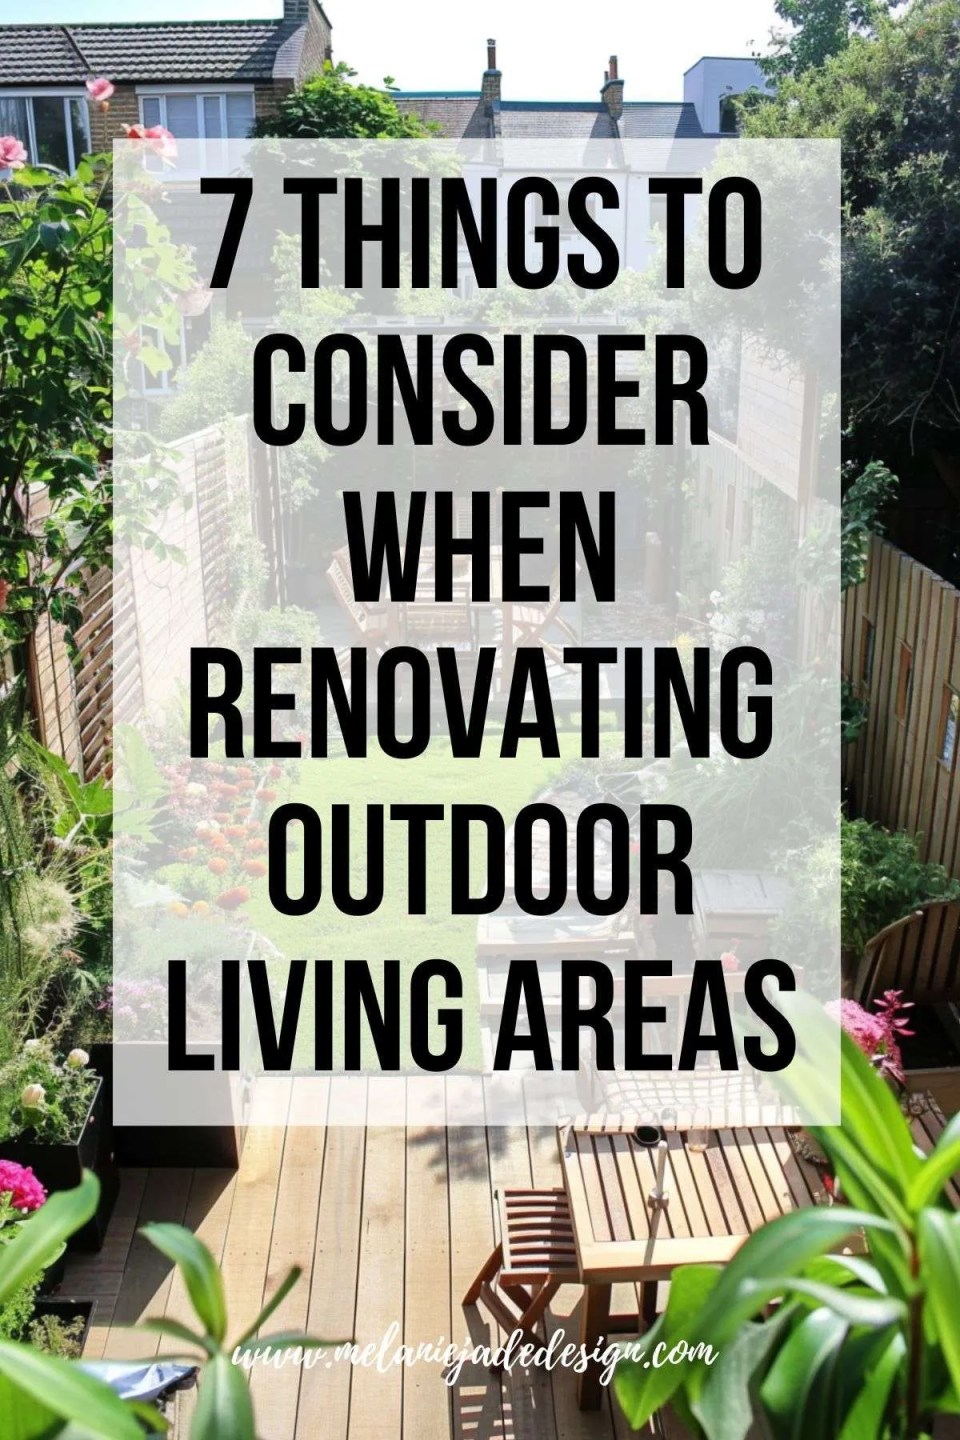 7 Things to Consider When Renovating Outdoor Living Areas Pinterest pin